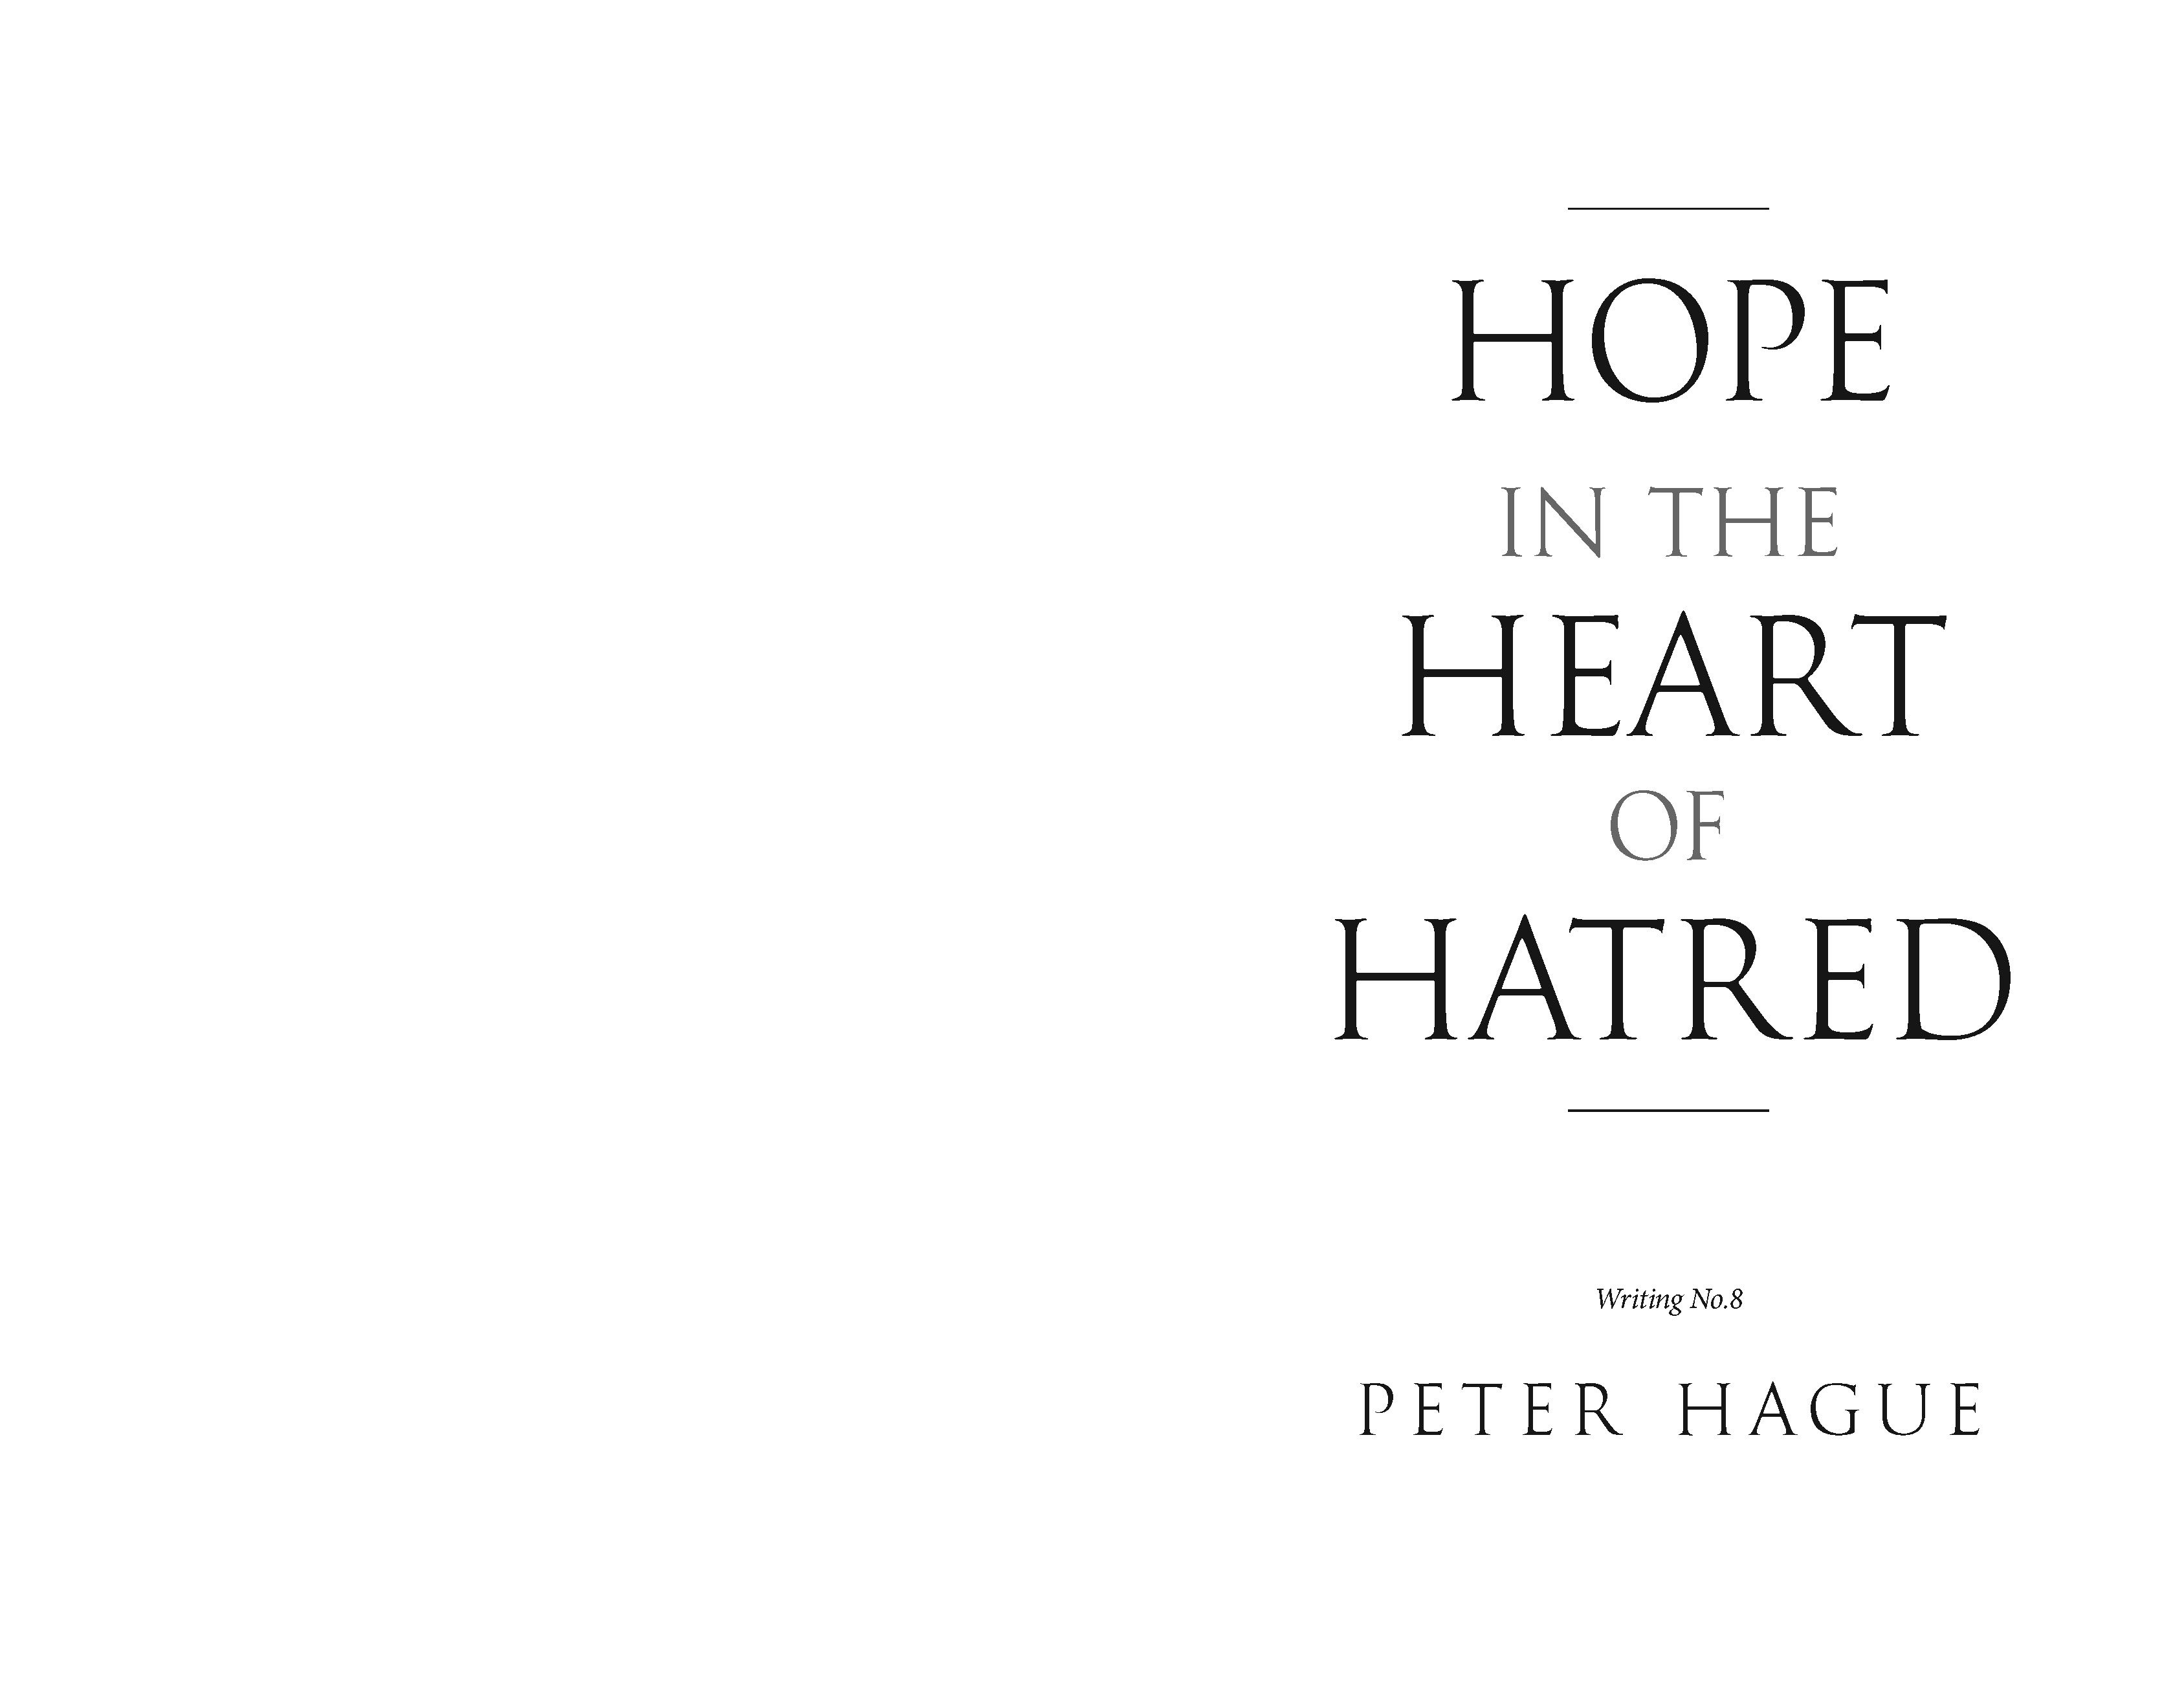 Peter Hague – Hope in the Heart of Hatred